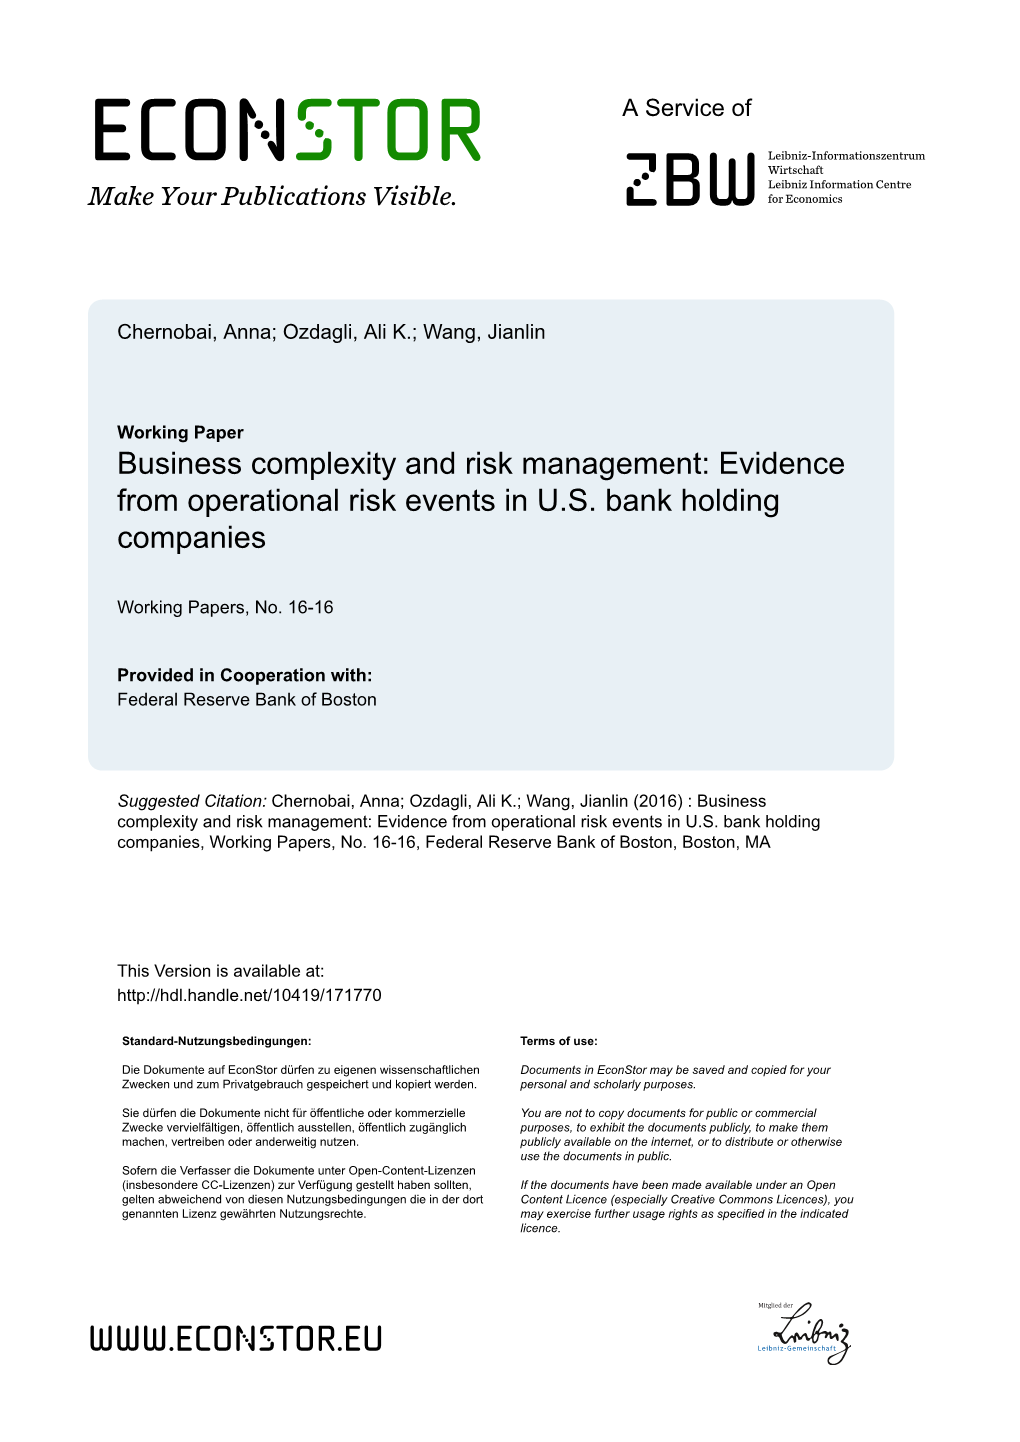 Evidence from Operational Risk Events in U.S. Bank Holding Companies